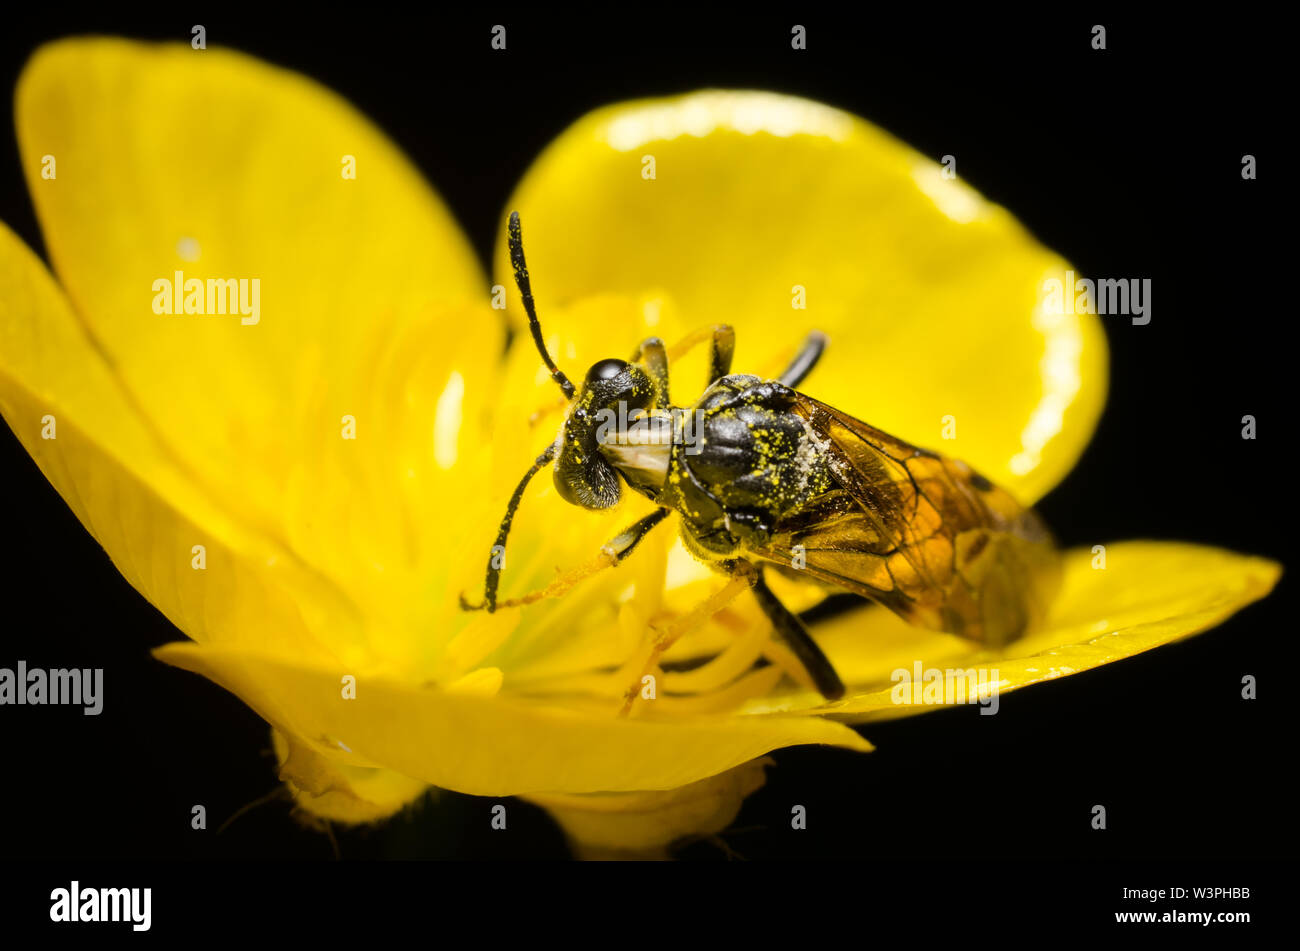 Hymenoptera, wasp insect in a yellow flower Stock Photo